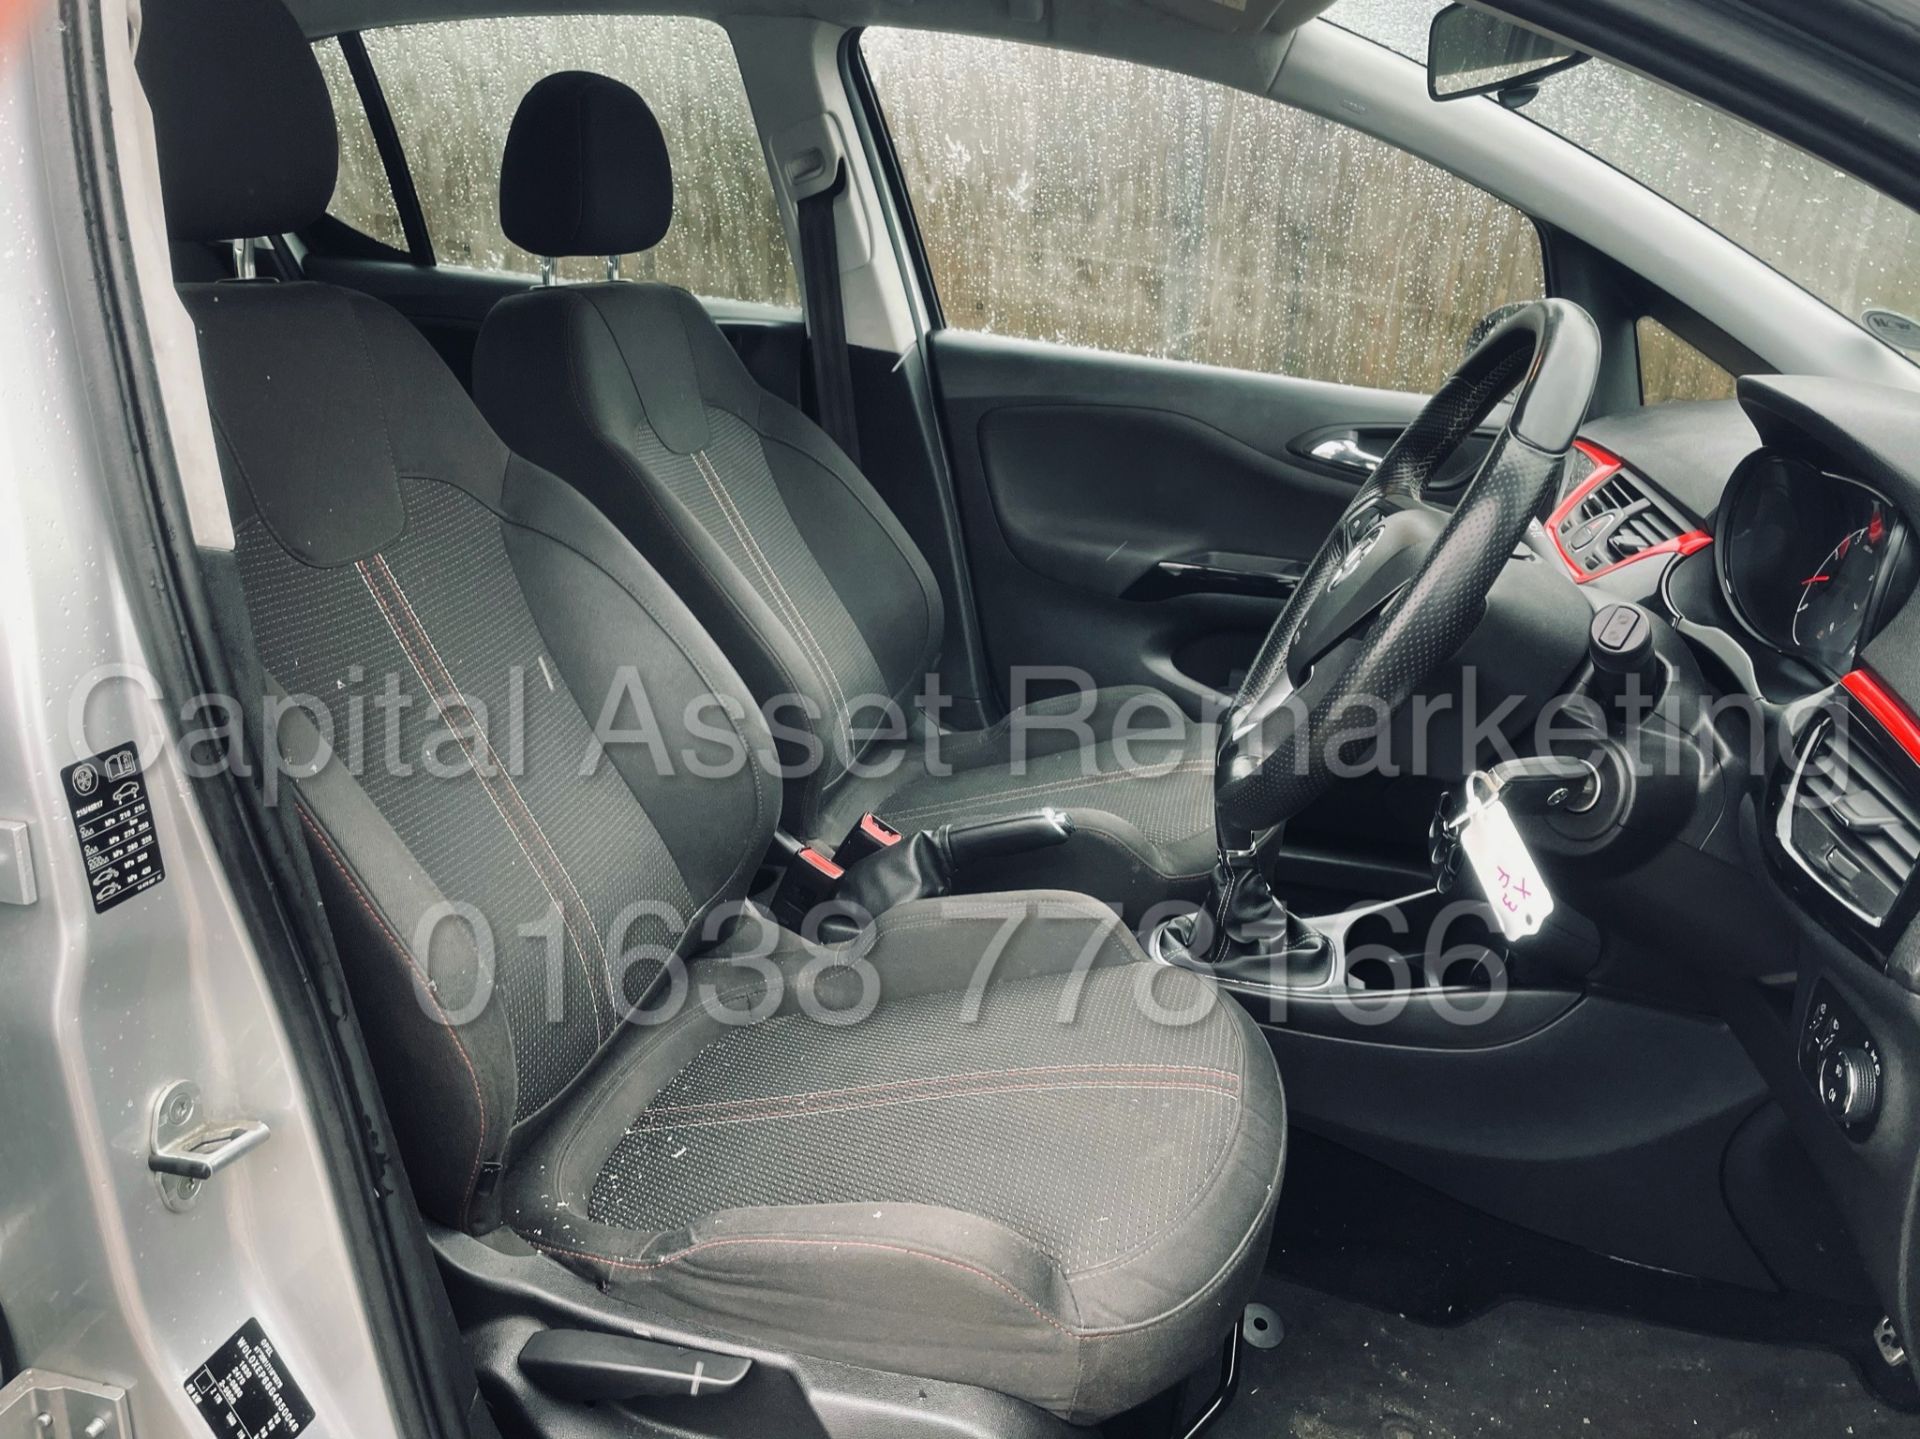 ON SALE VAUXHALL CORSA *LIMITED EDITION* 5 DOOR (2017 MODEL) '1.4 PETROL - ECOFLEX' *AIR CON* - Image 30 of 44